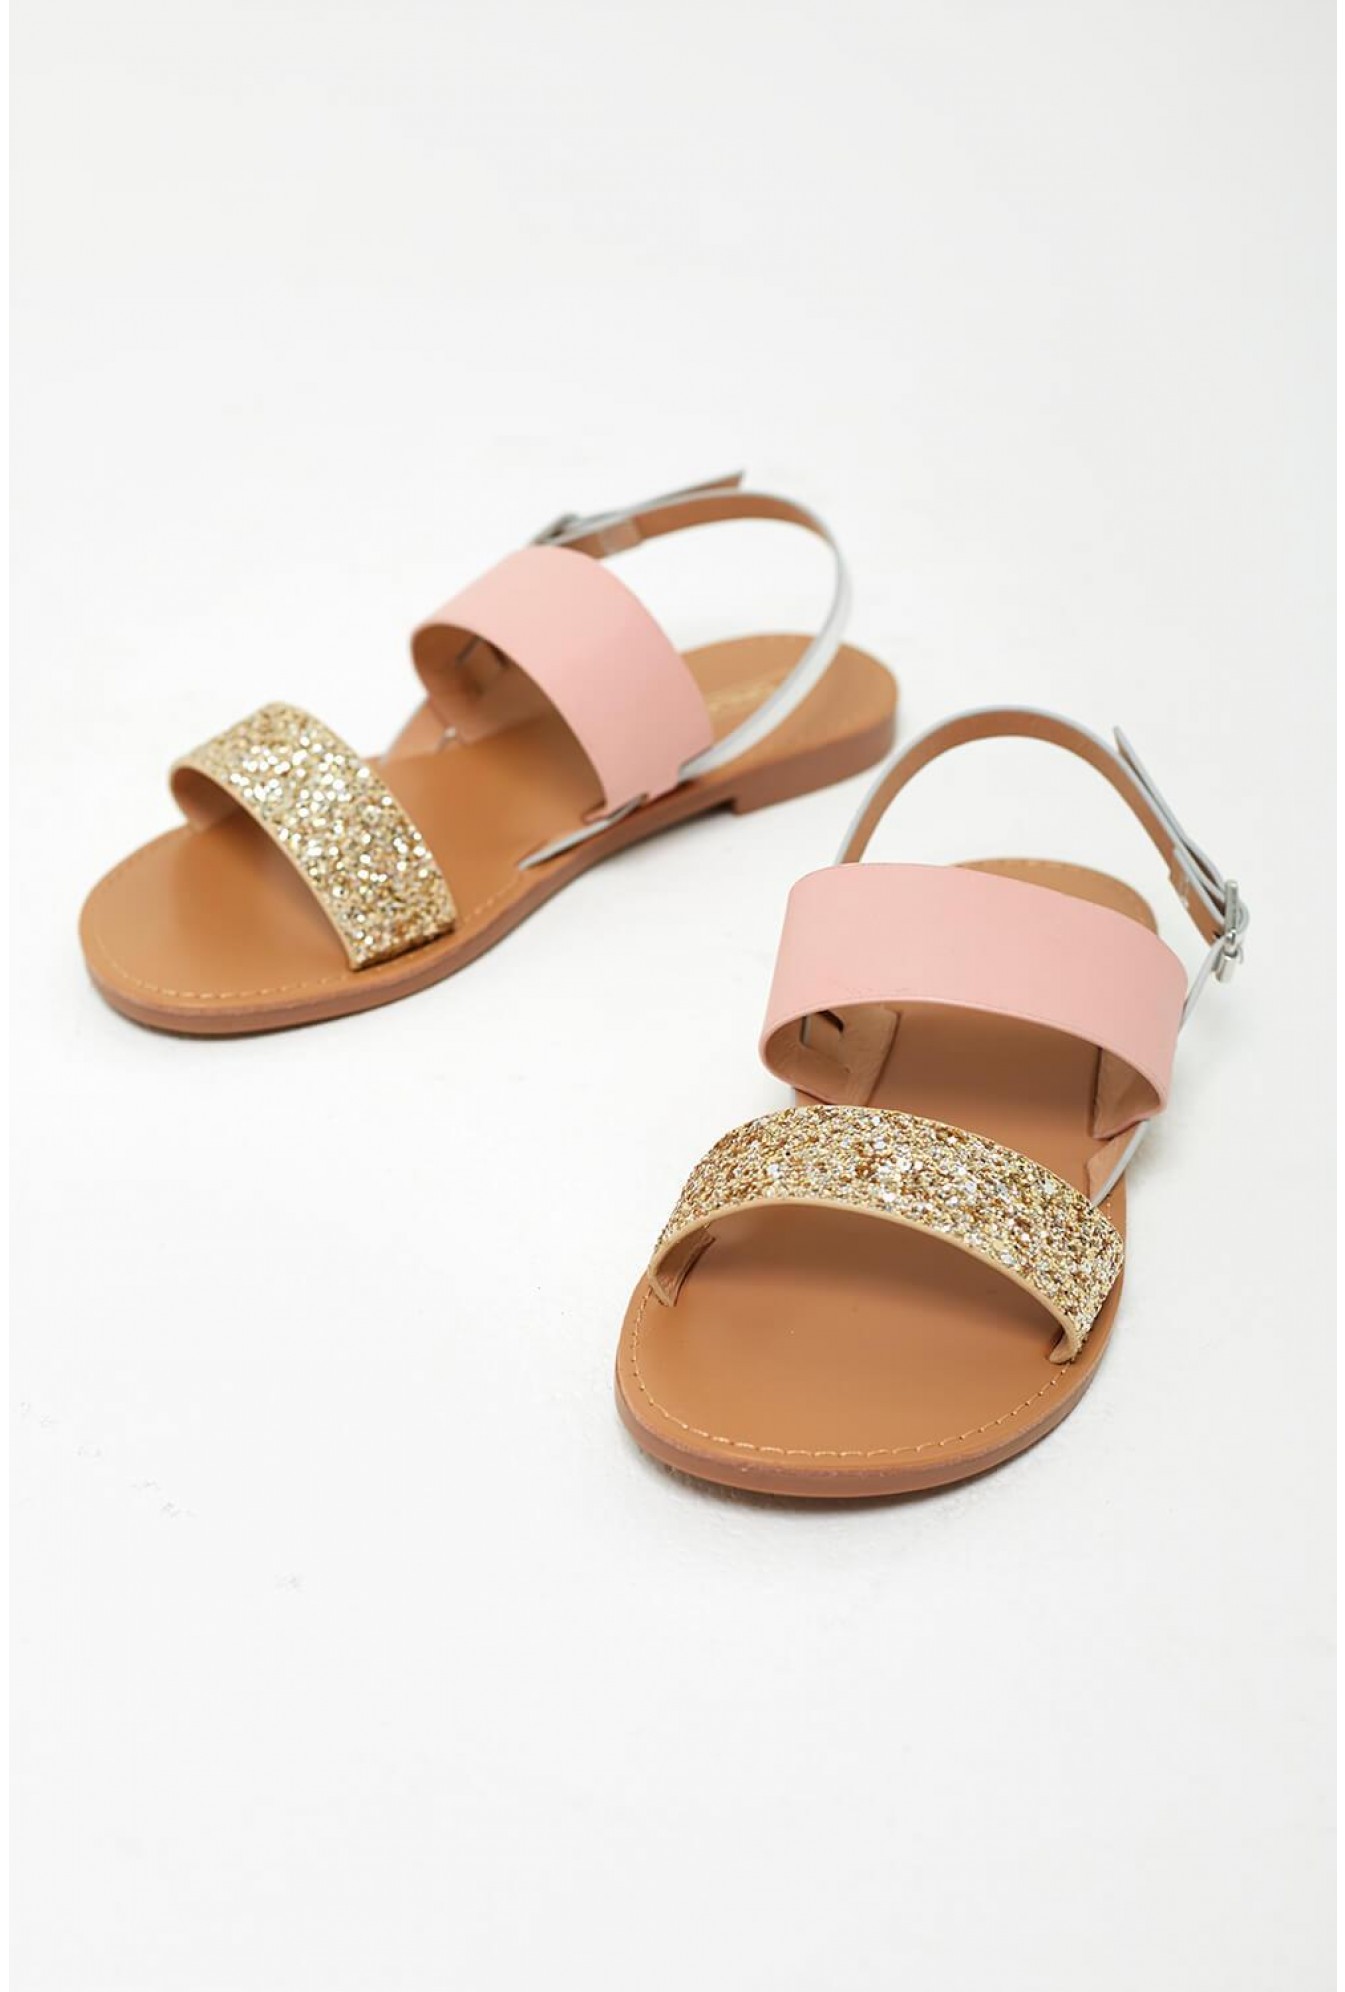 Only Mandala Flat Sandals in Gold Sparkle | iCLOTHING